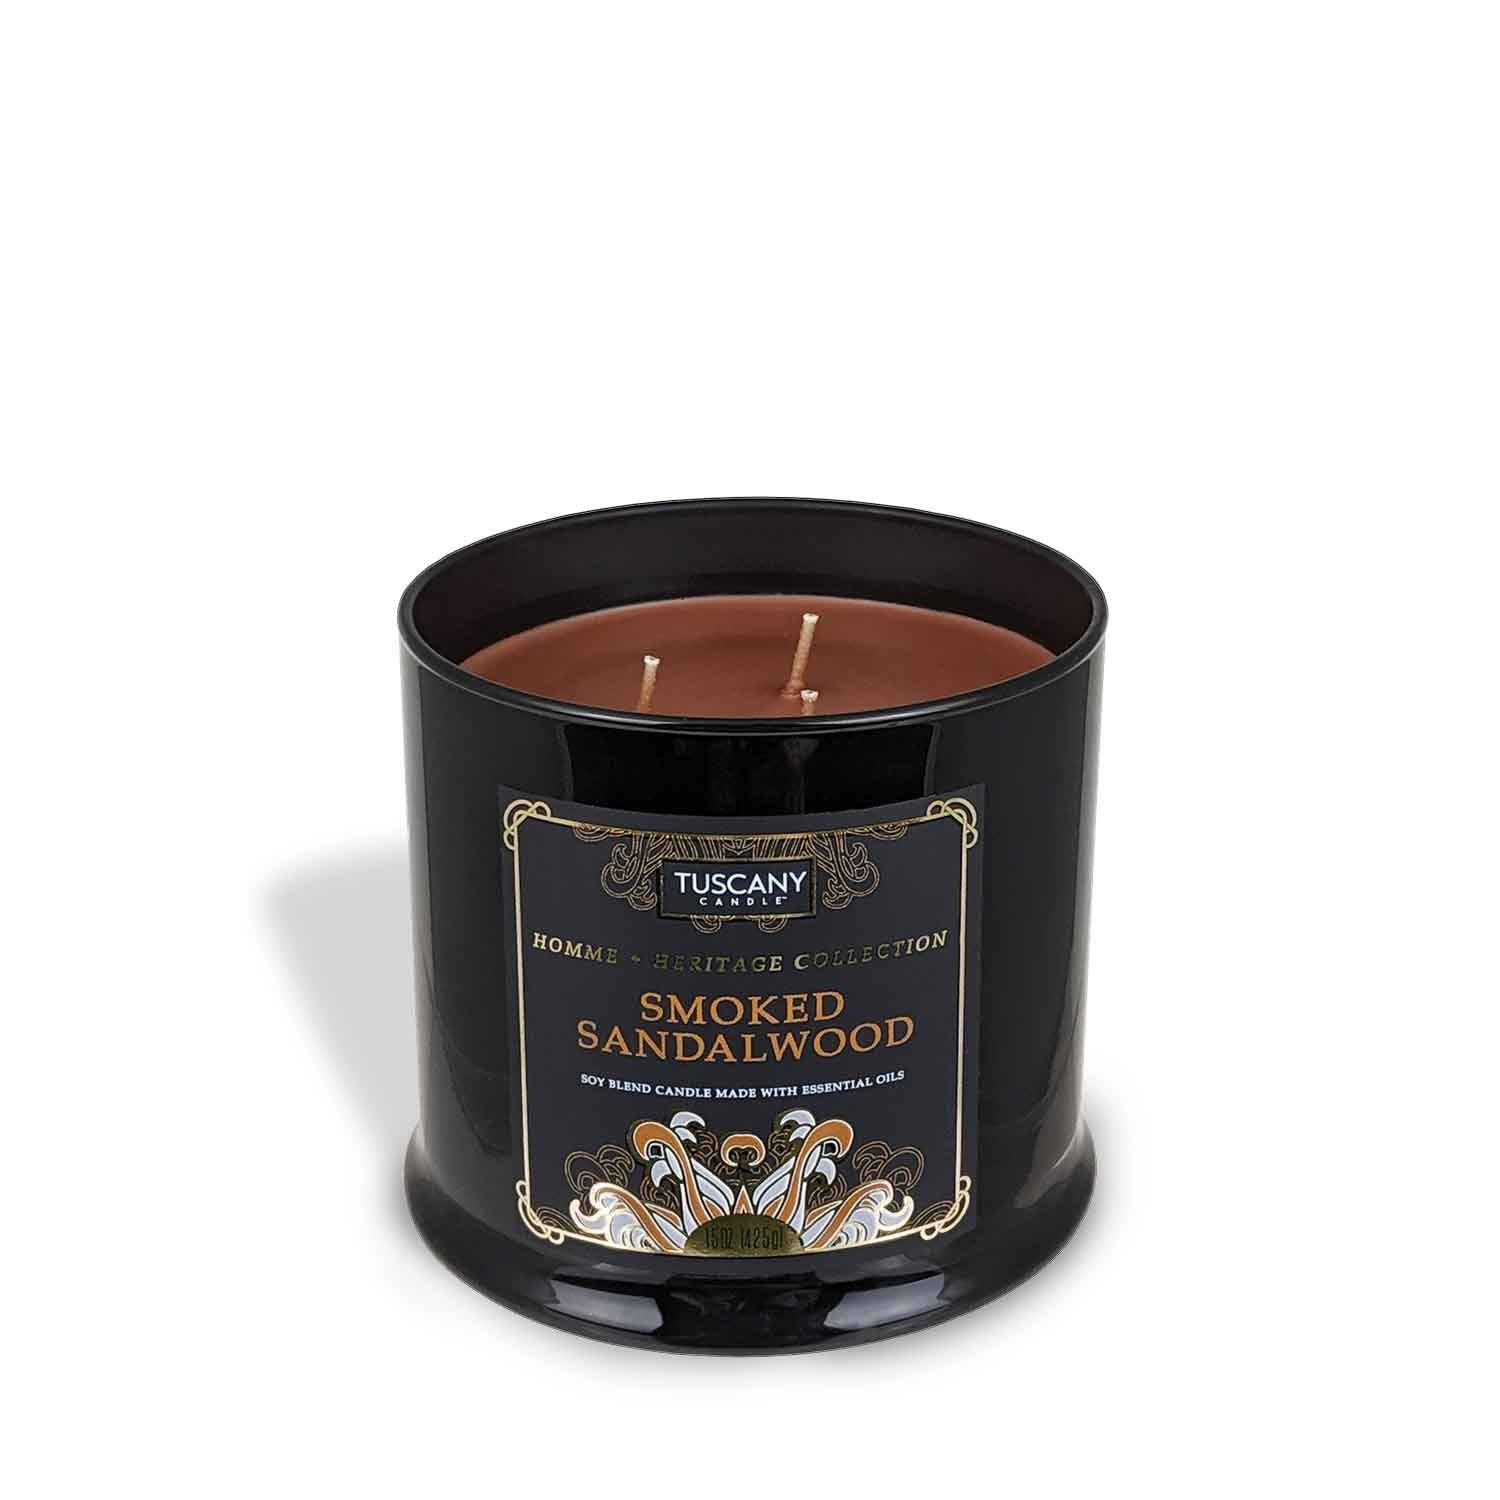 A Tuscany Candle Smoked Sandalwood scented jar candle (15 oz), from their Homme + Heritage Collection, in a black tin, resting on a white background.